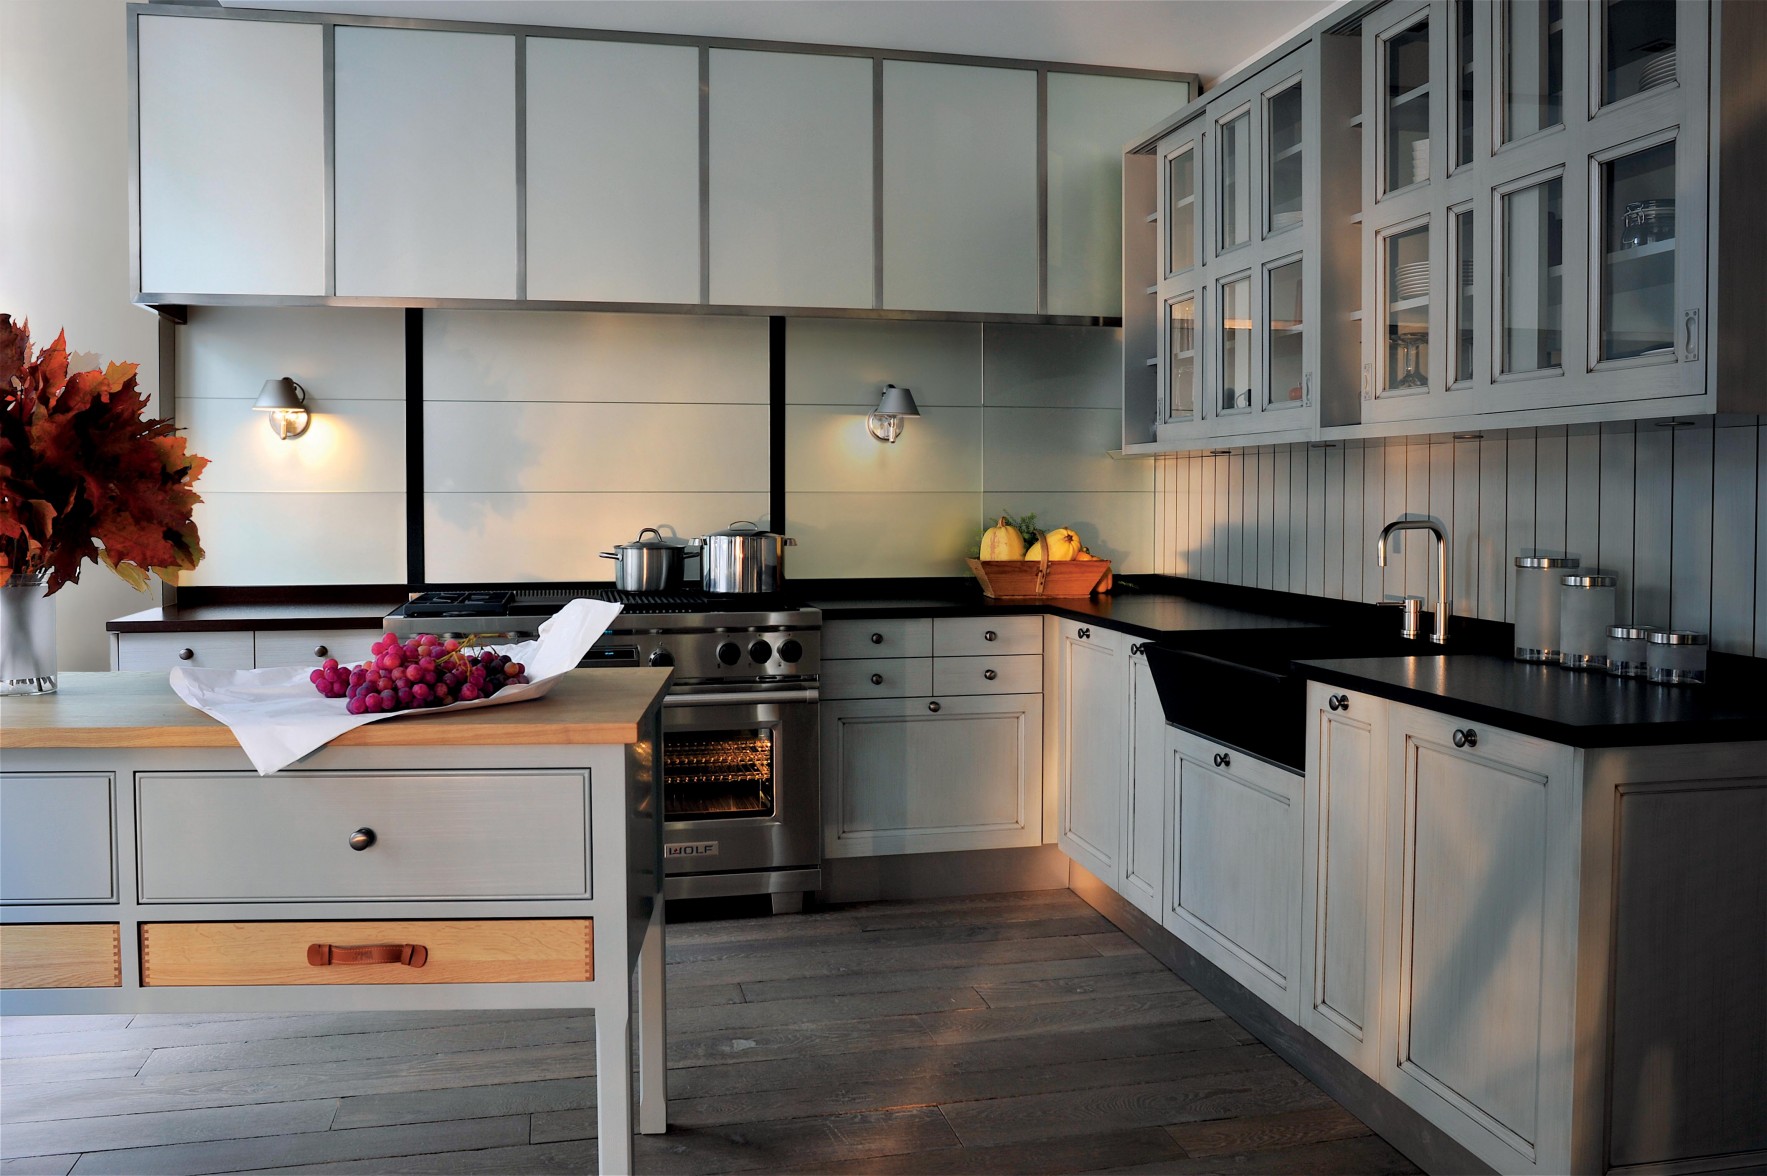 Simplicity and elegance for a classic kitchen with great ergonomics